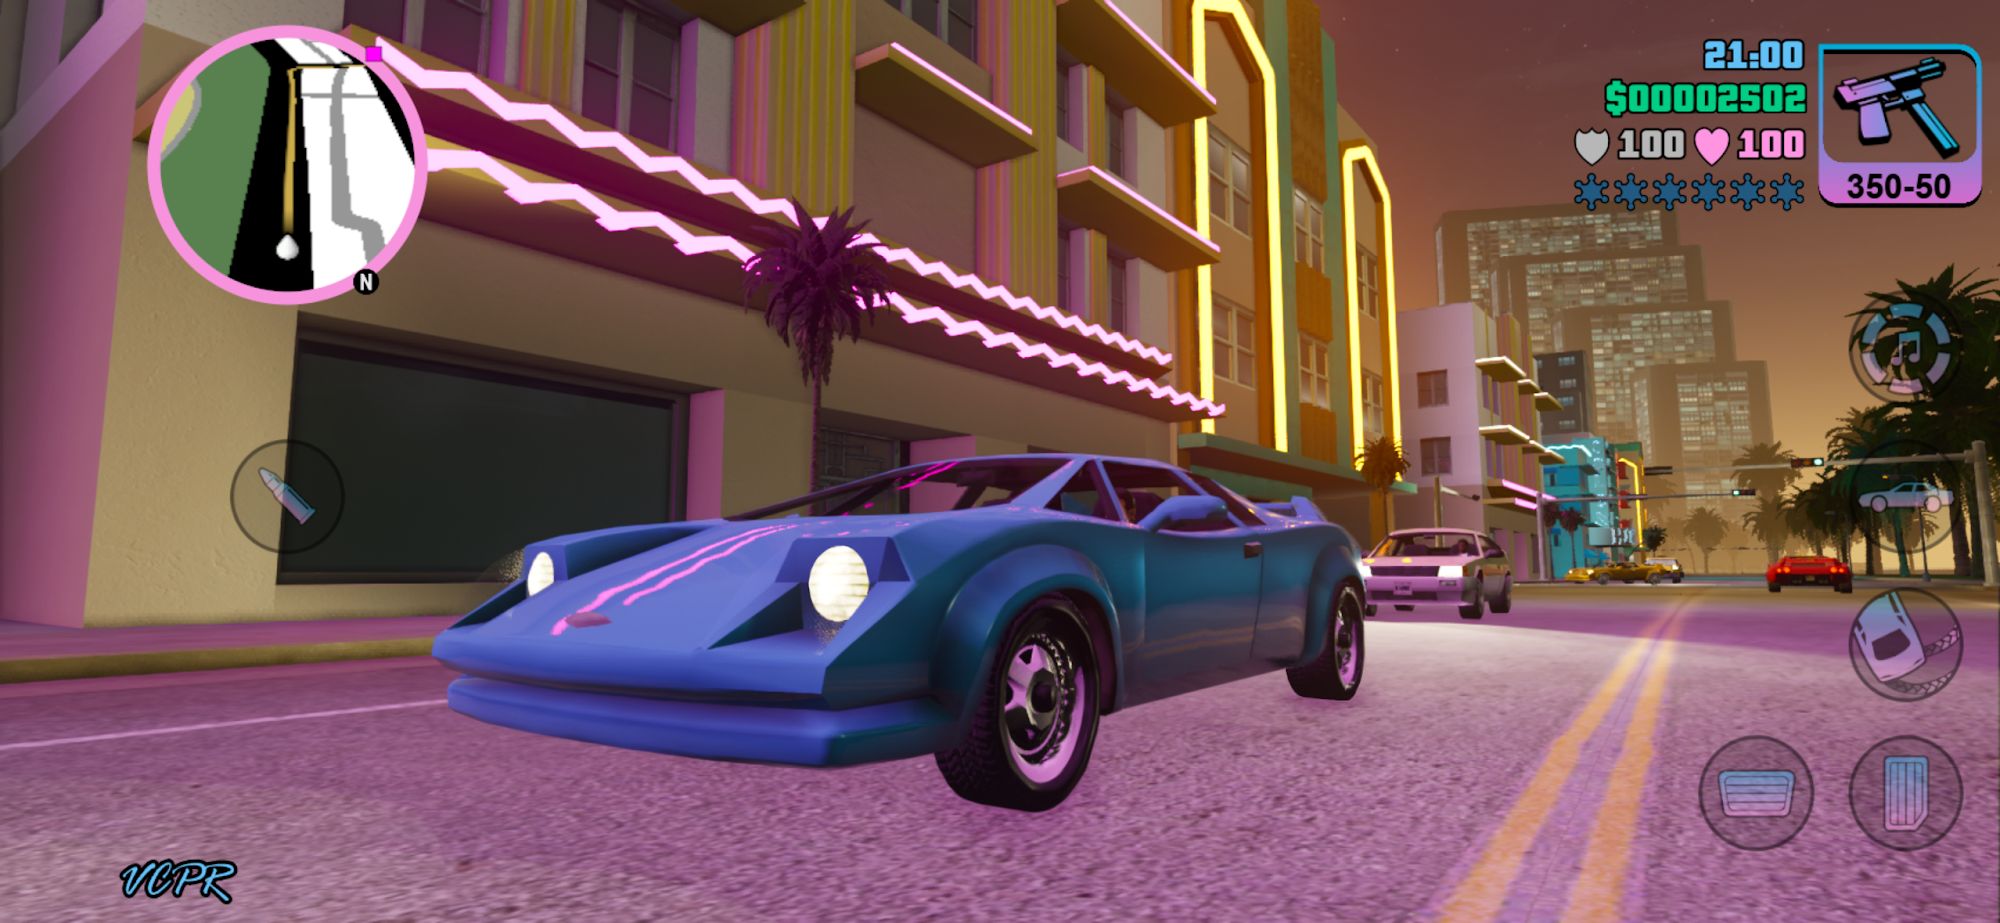 Gameplay of the GTA: Vice City - Definitive for Android phone or tablet.